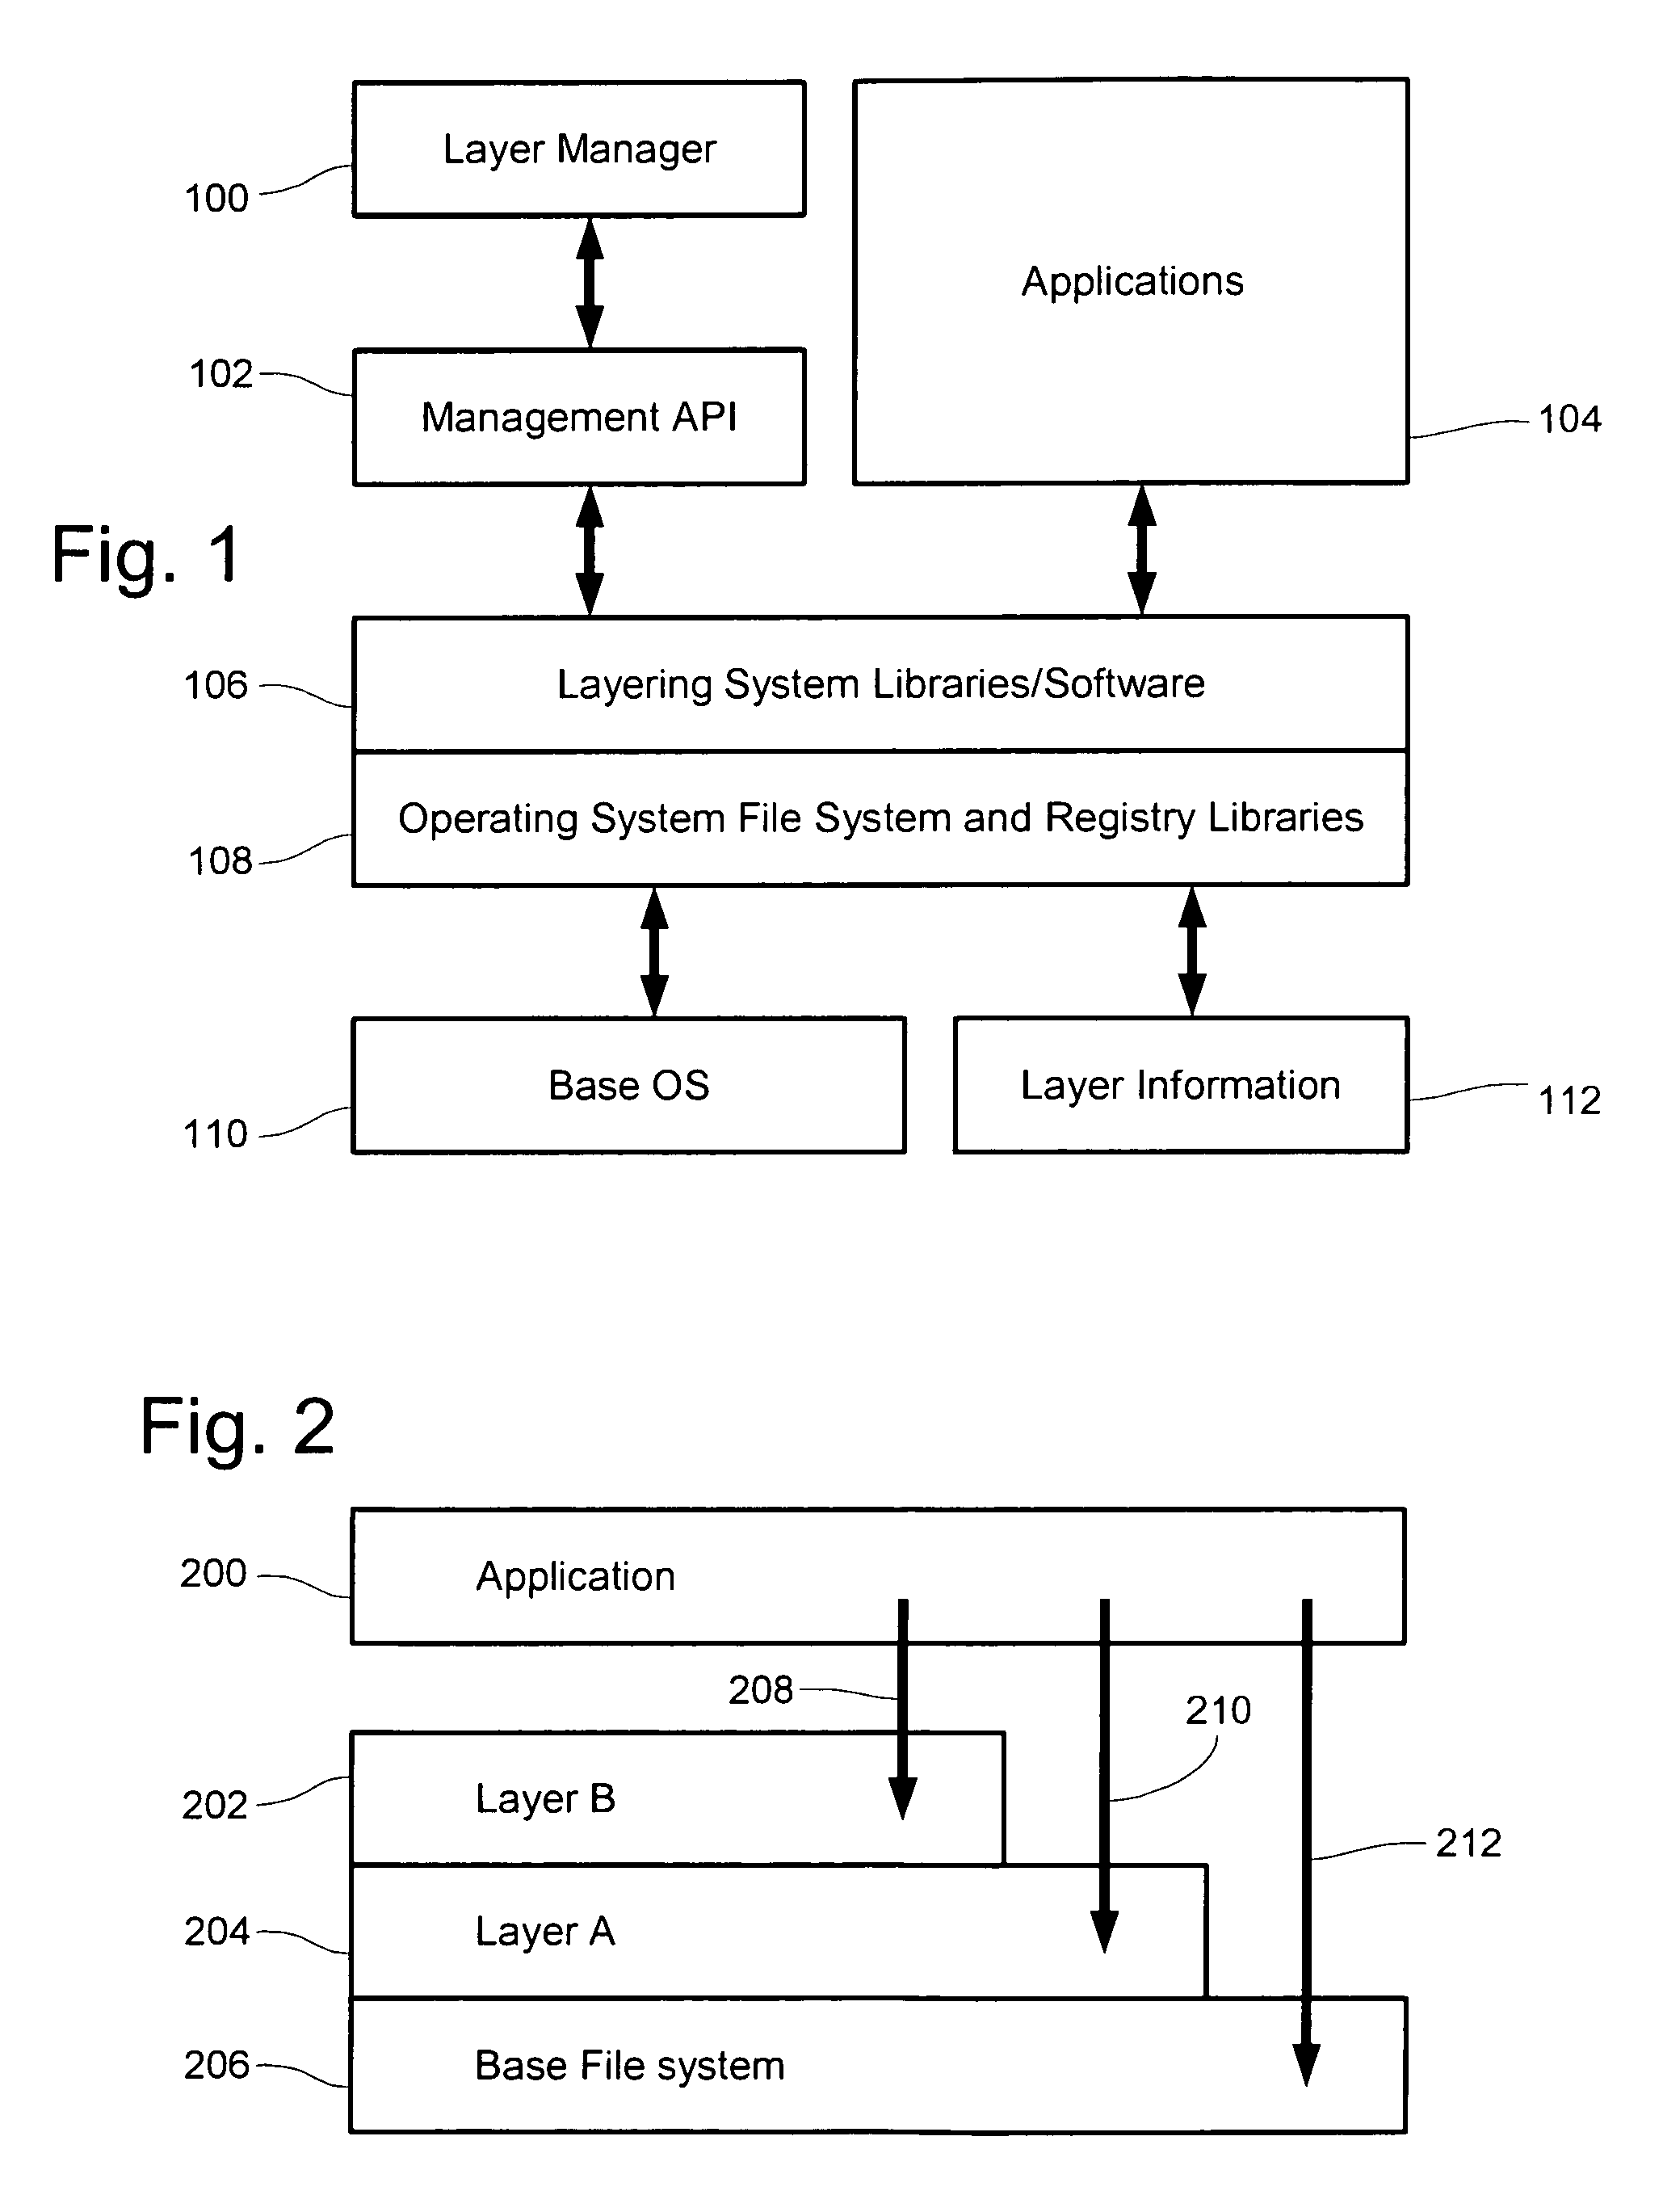 Run-time application installation application layered system